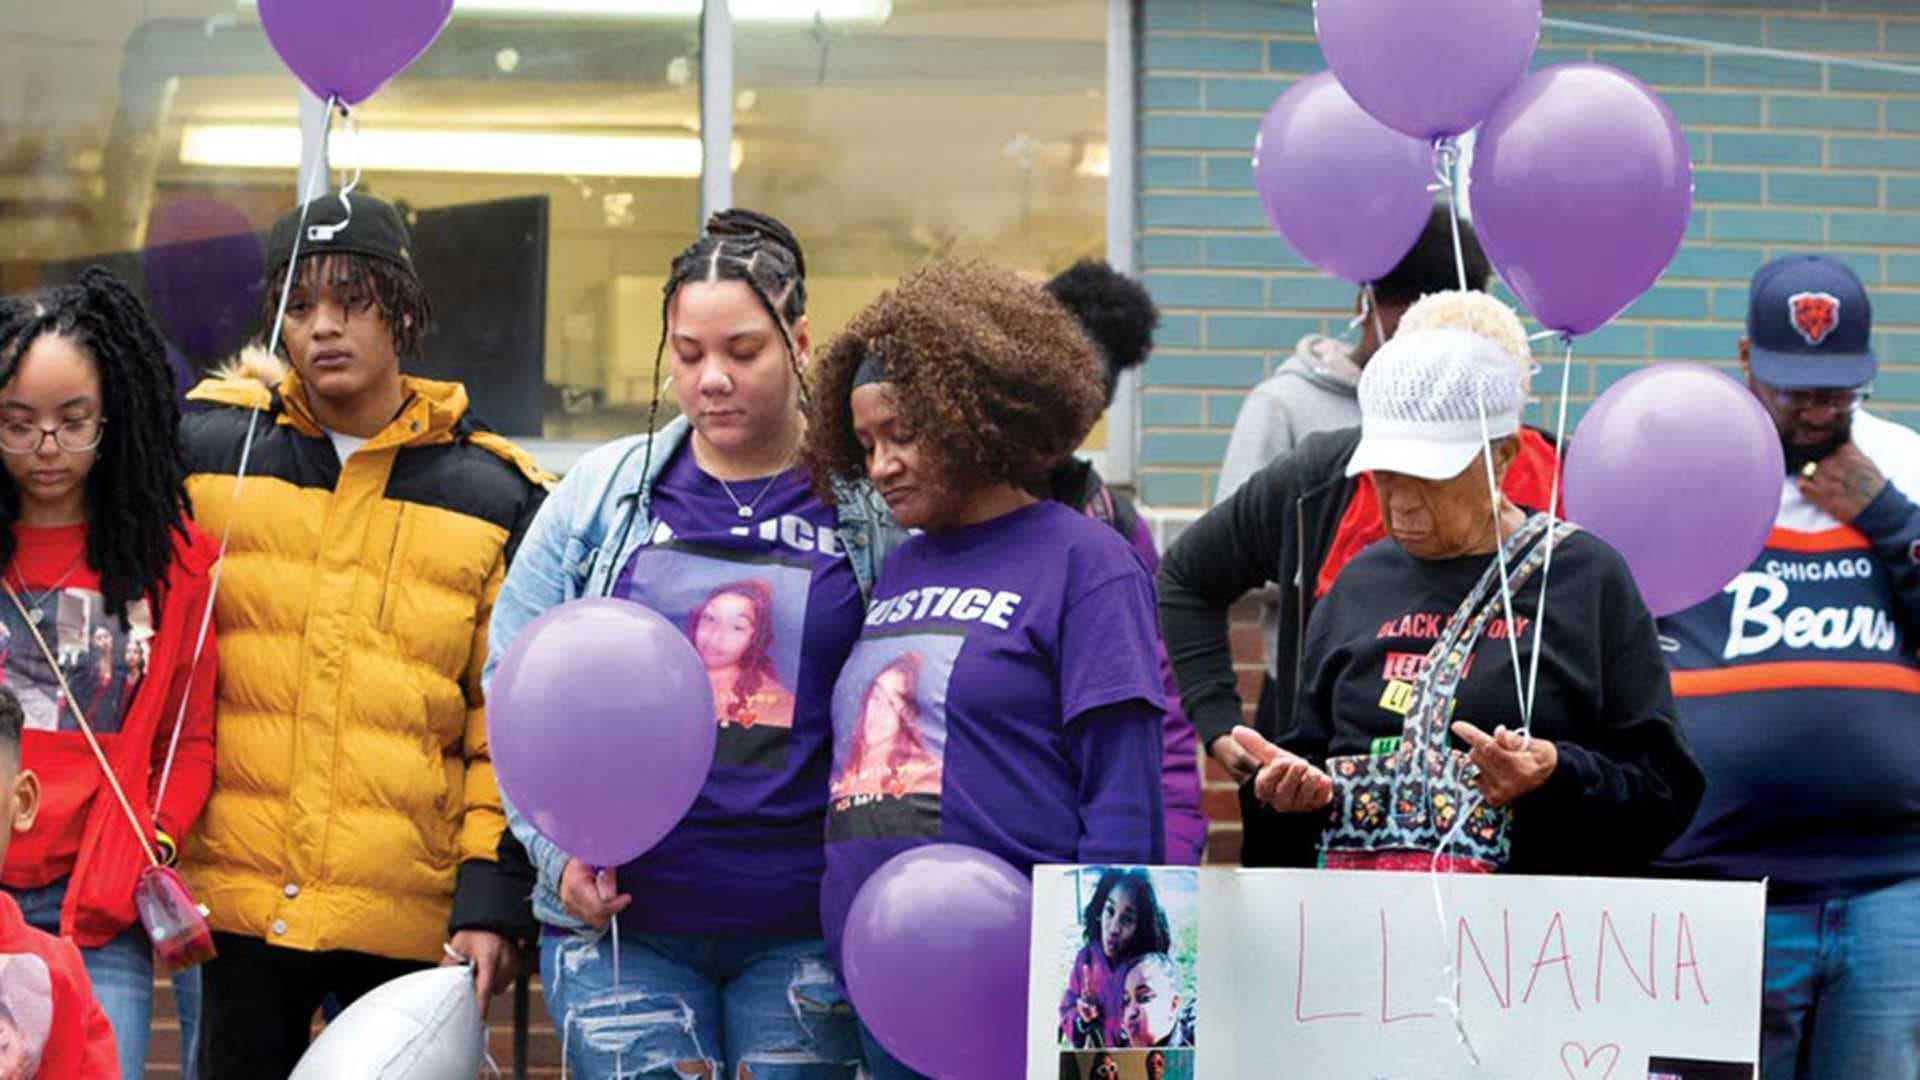 mourners gather with purple balloons